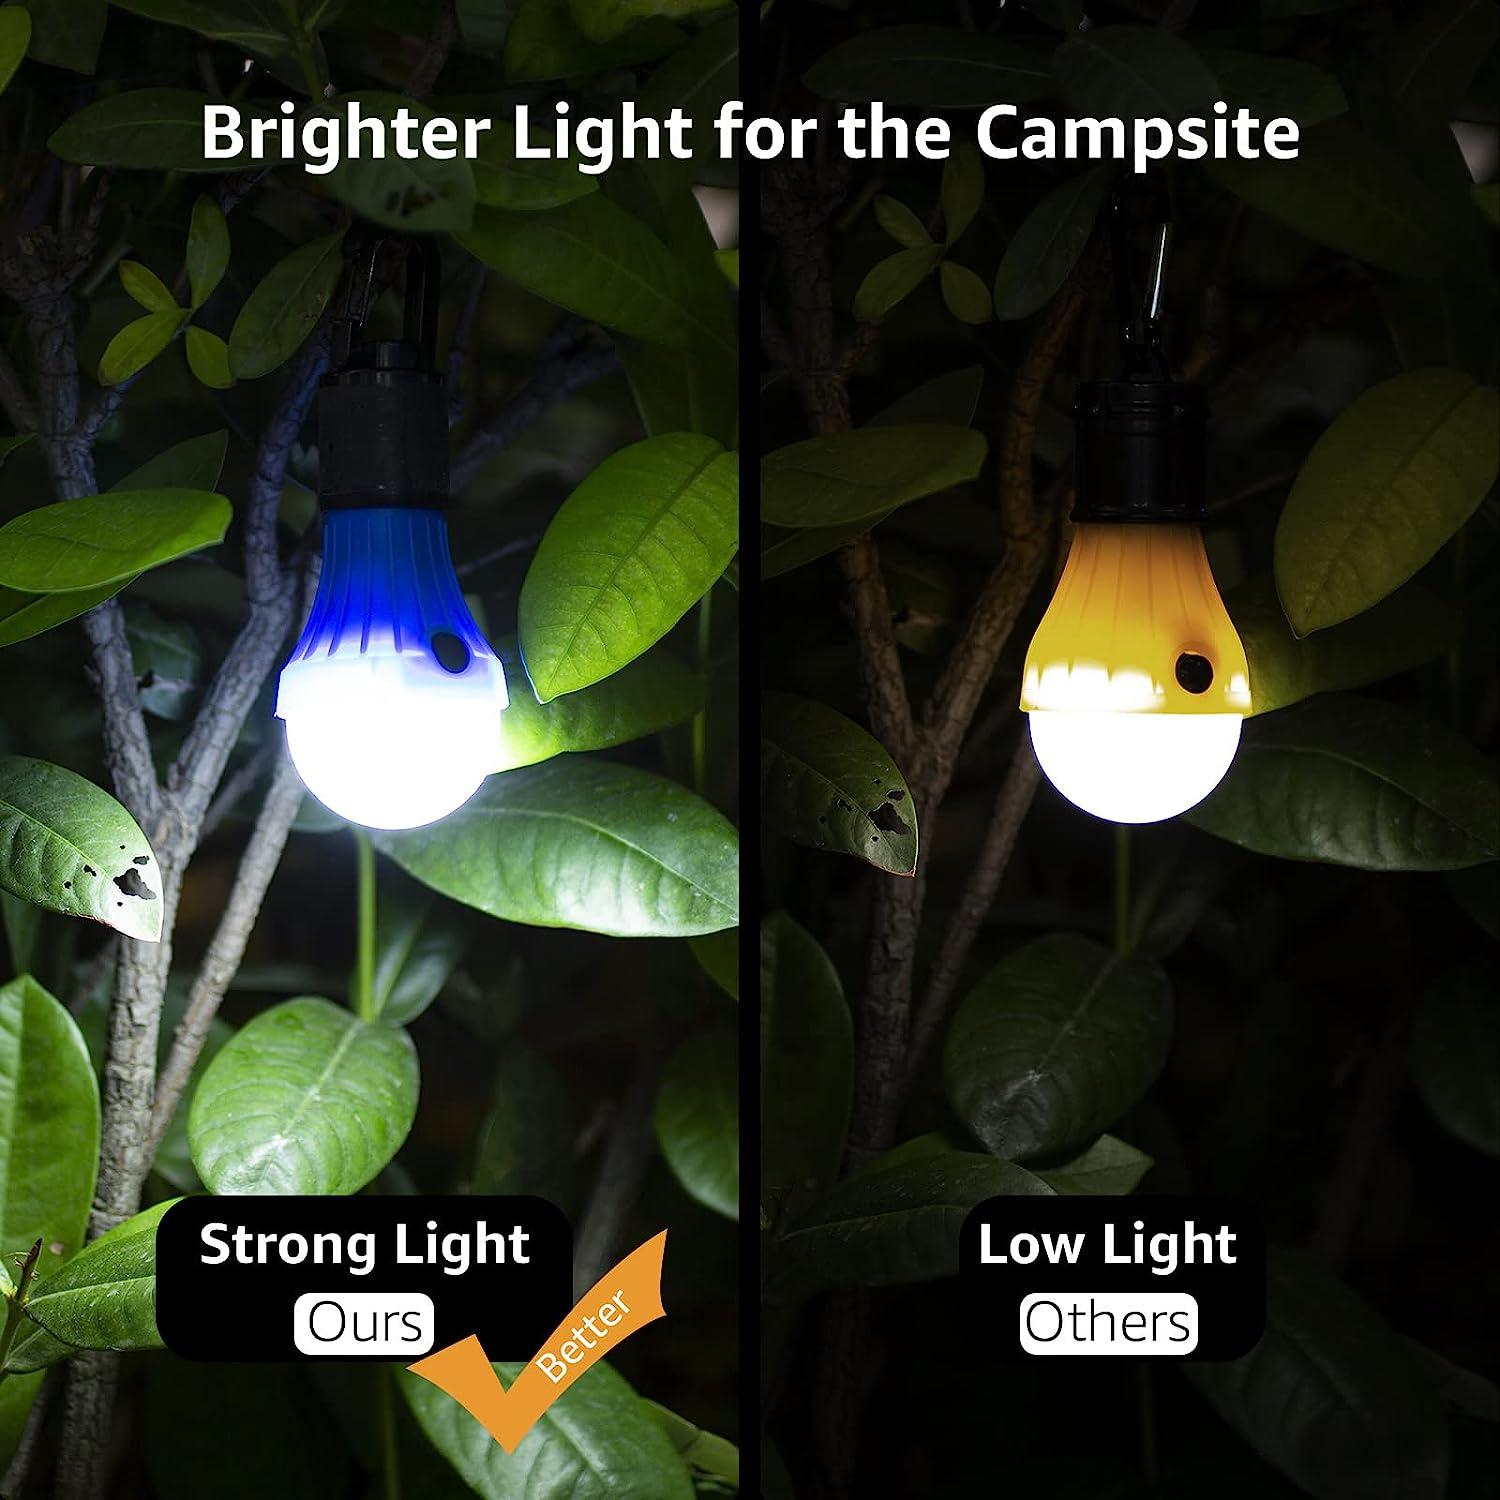 LED Tent Lights Lamp Portable Camping Light Bulbs Lantern Battery Powered  for Hurricane Emergency Backpacking Hiking Outdoor and Indoor, Outage